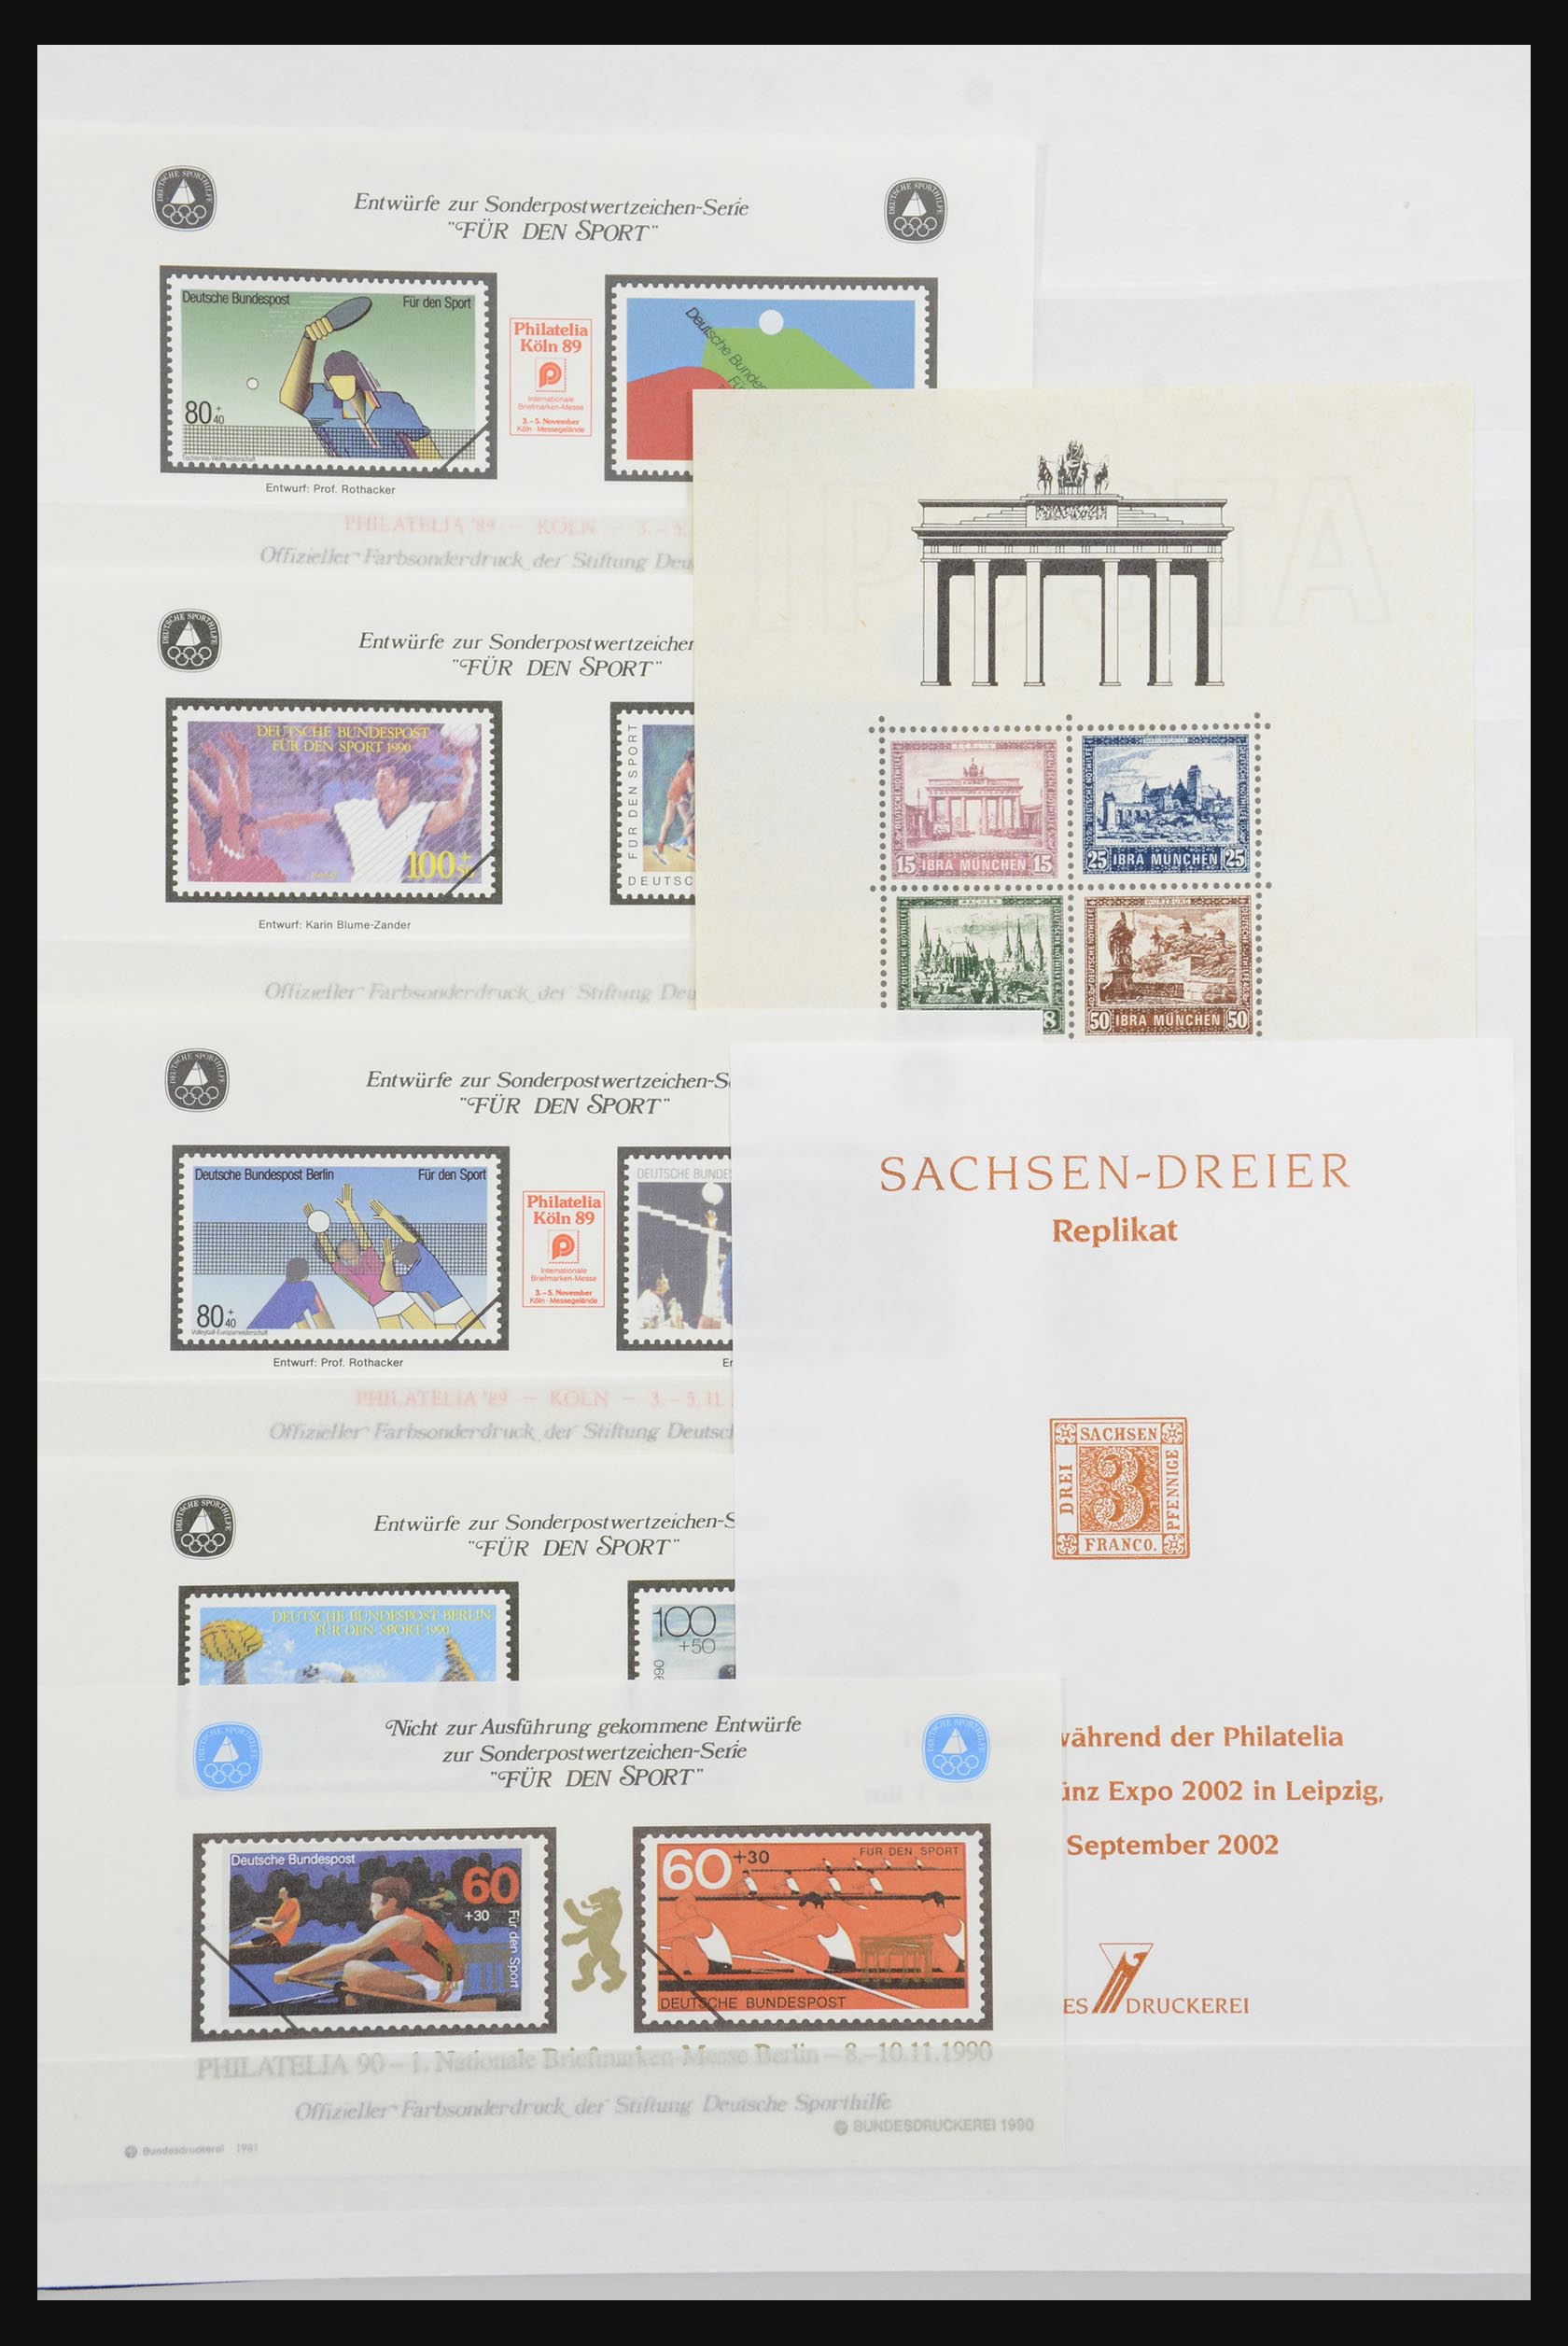 32050 009 - 32050 Bundespost special sheets 1980-2010.